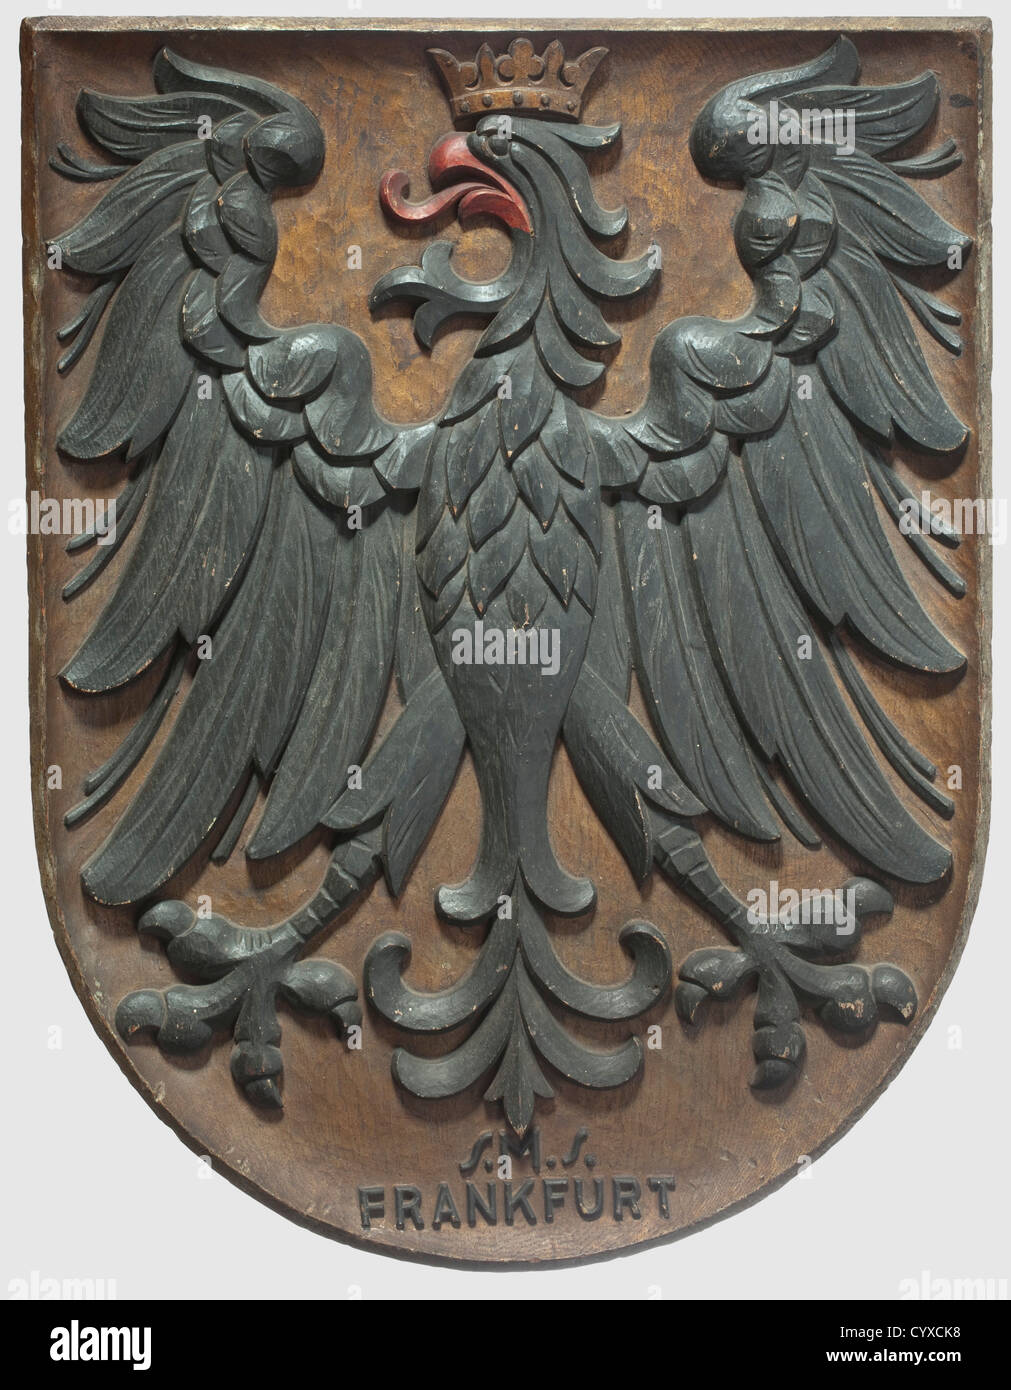 A German presentation shield from the S.M.S.Frankfurt,circa 1915 - 1918 Crowned eagle of the Frankfurt coat of arms,of beautifully carved oak wood,surmounting an inscription 'S.M.S.Frankfurt' in relief,set in black and gold bronze.Height 45 cm.The S.M.S.Frankfurt was a Wiesbaden class light cruiser.It took part in the battle of Jutland in 1916,the most important naval battle of World War I.In 1919 the fleet was ordered to be scuttled at Scapa Flow.The British,however,prevented this and transferred the ship to the United States as loot,where it w,Additional-Rights-Clearences-Not Available Stock Photo